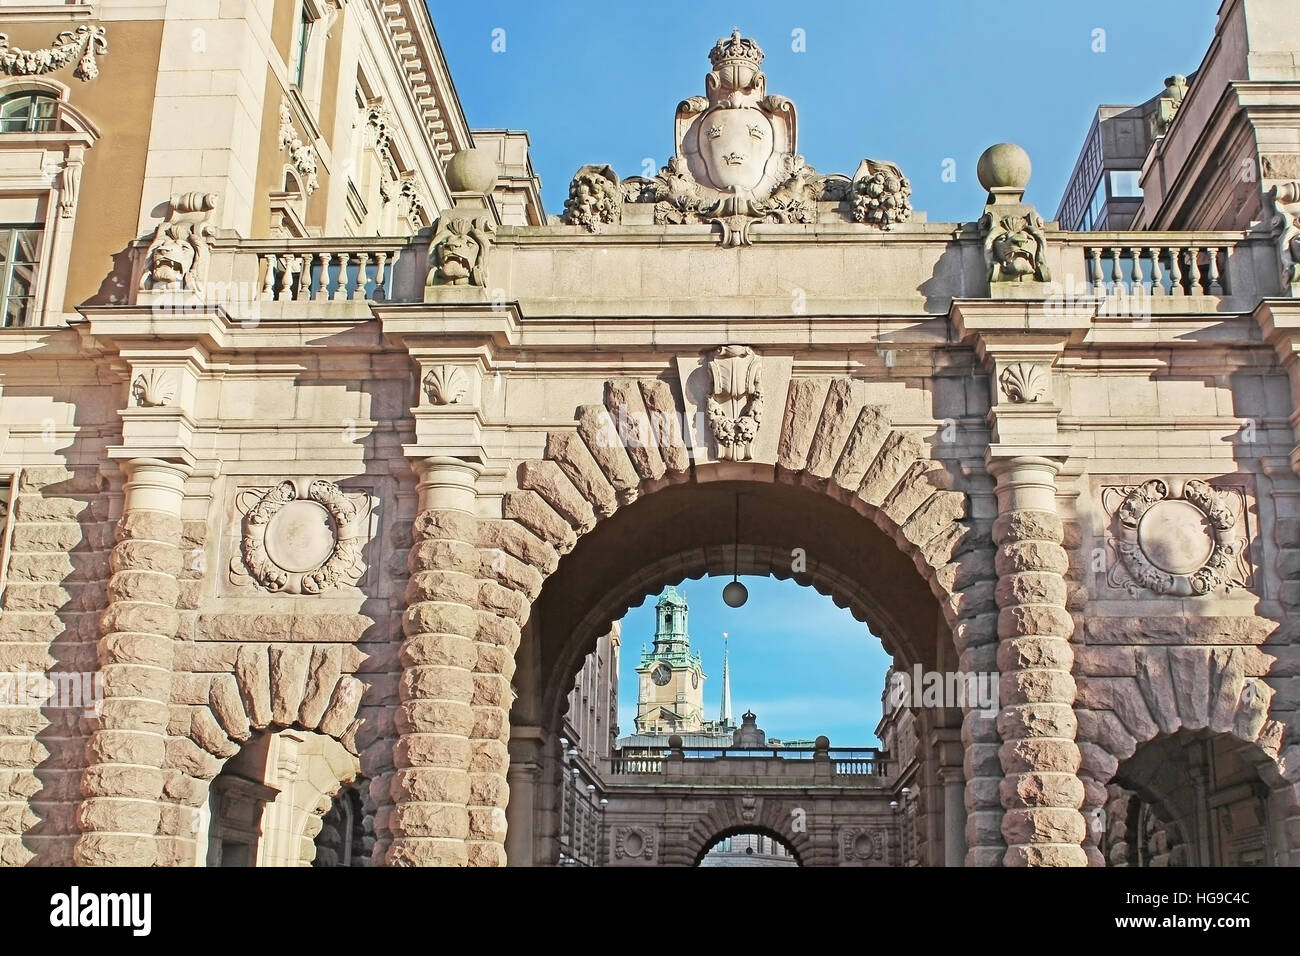 Arch of parliament and Drottninggatan street in Stockholm, Sweden. Stock Photo